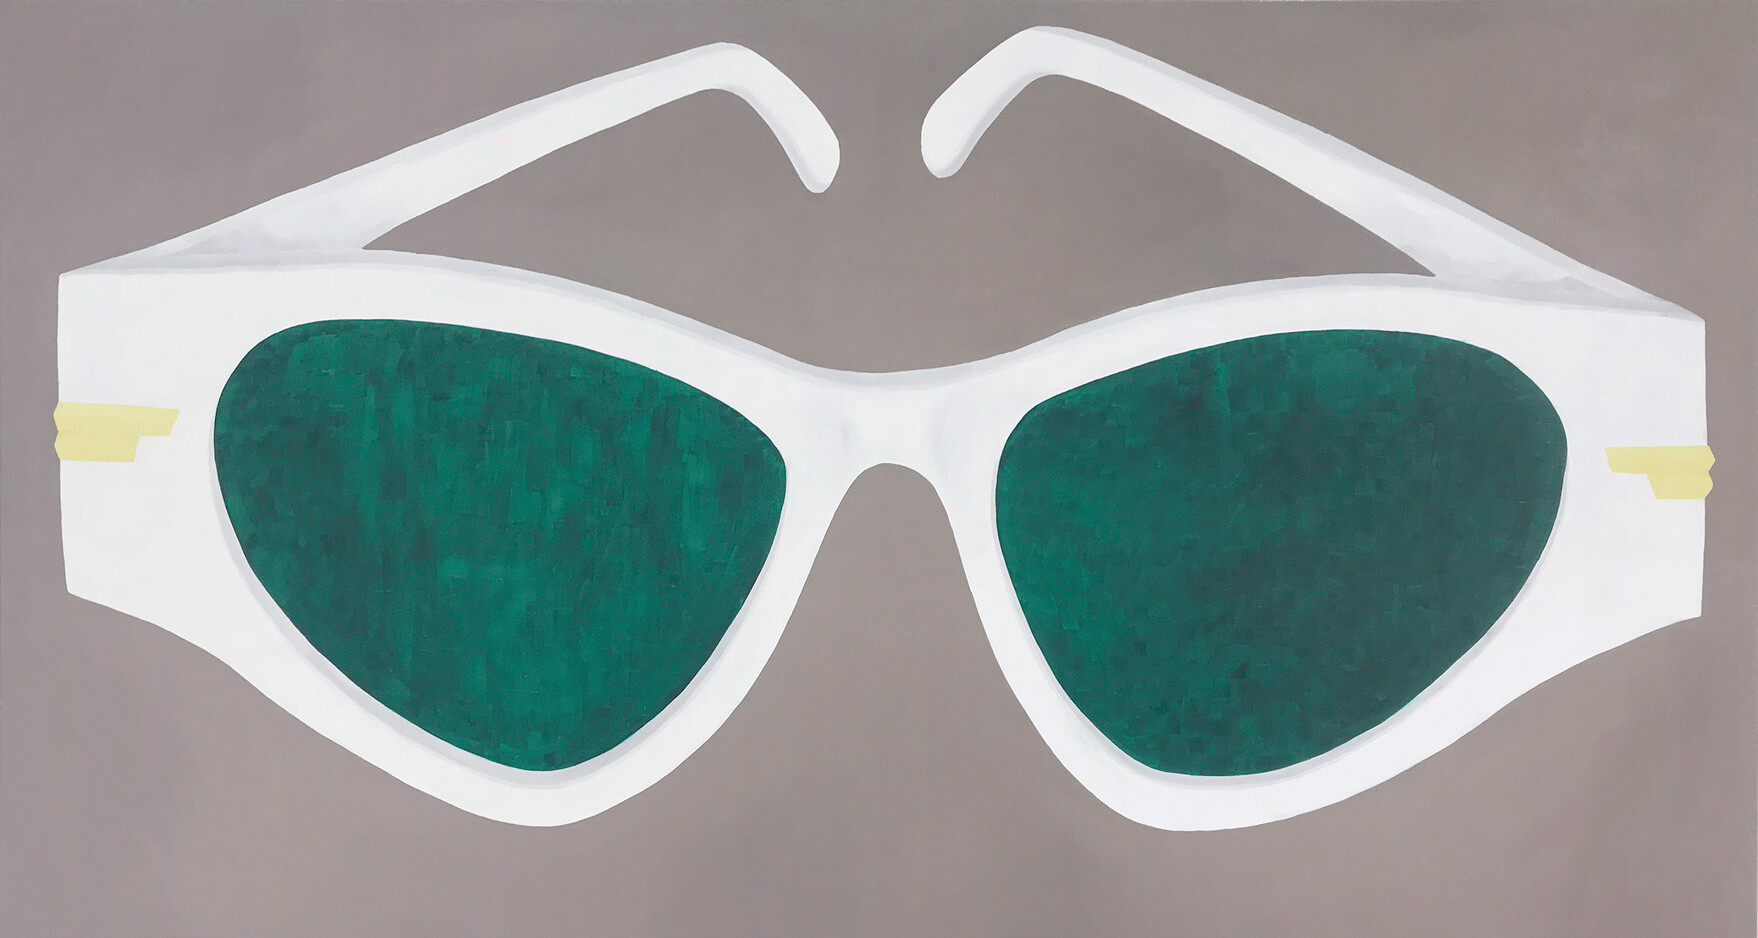 A detail from a work by 	Raphaela Simon, titled Weiße Brille (White Glasses), dated2020.